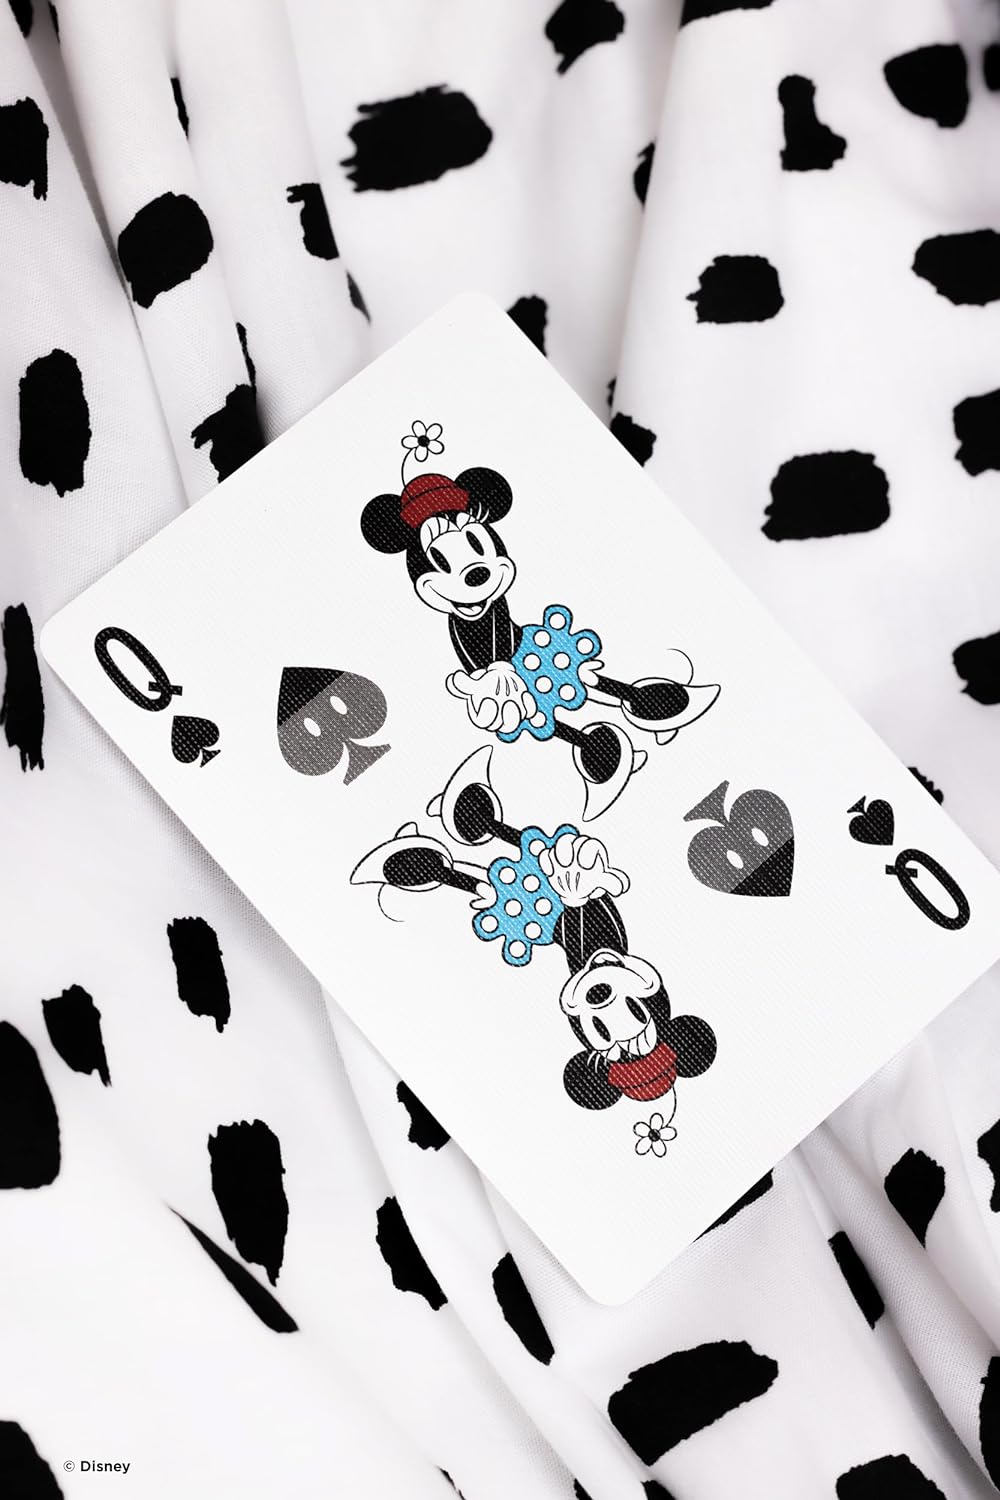 Bicycle Disney Classic Mickey Mouse Playing Cards - Bards & Cards